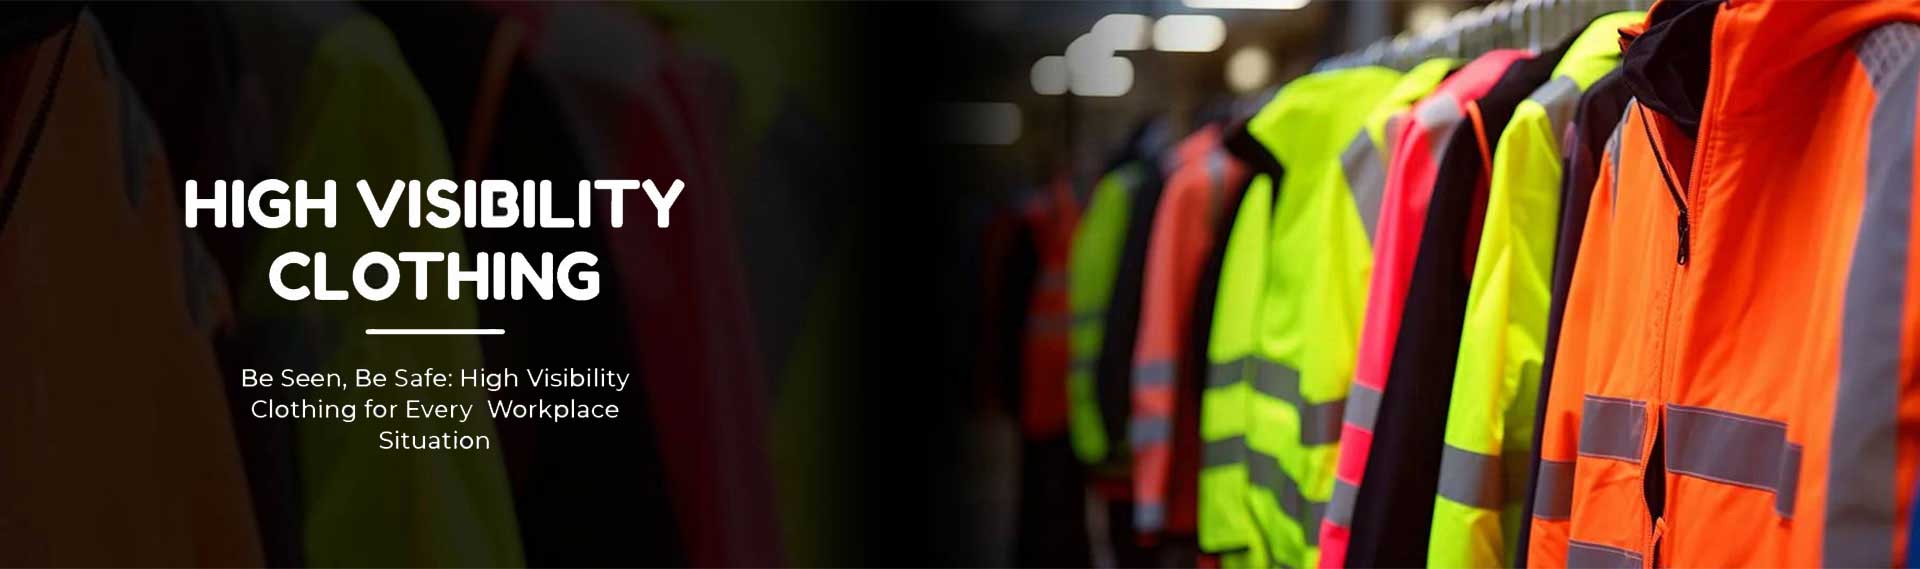 High Visibility Clothing Manufacturers in Israel